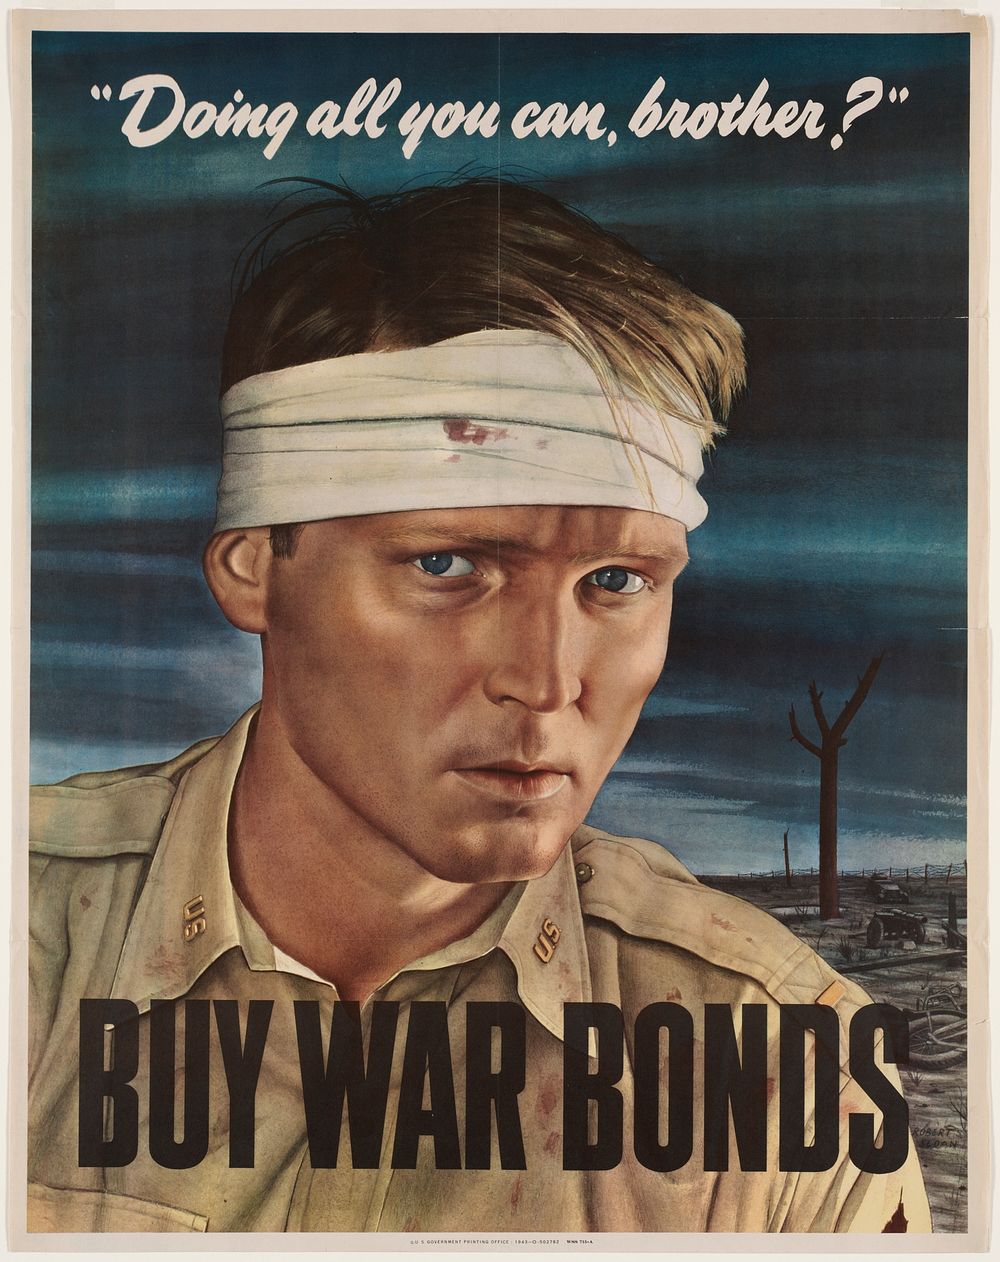             Doing all you can, brother? Buy war bonds          